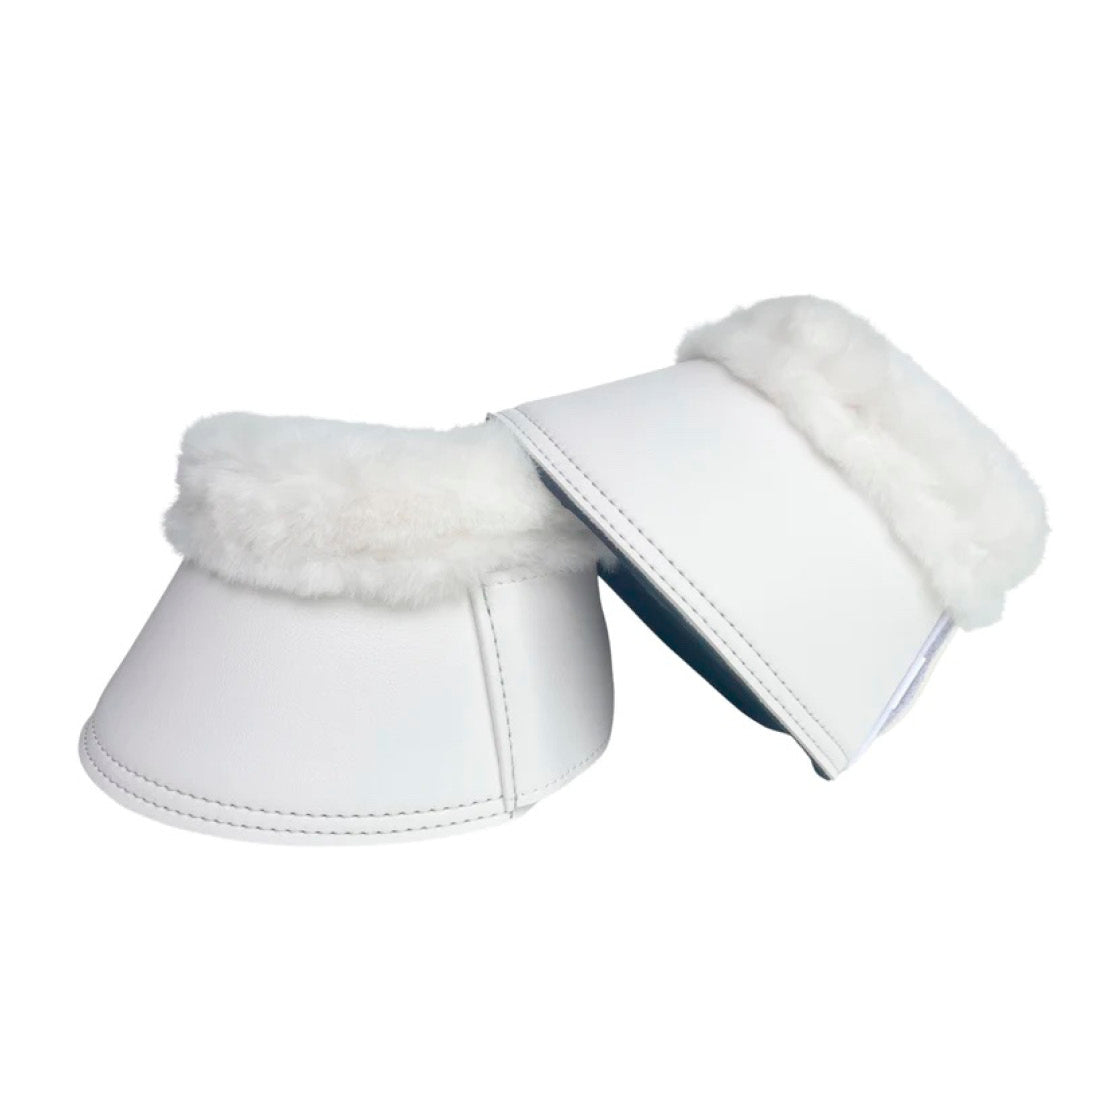 Classic white dressage bell boots for horses